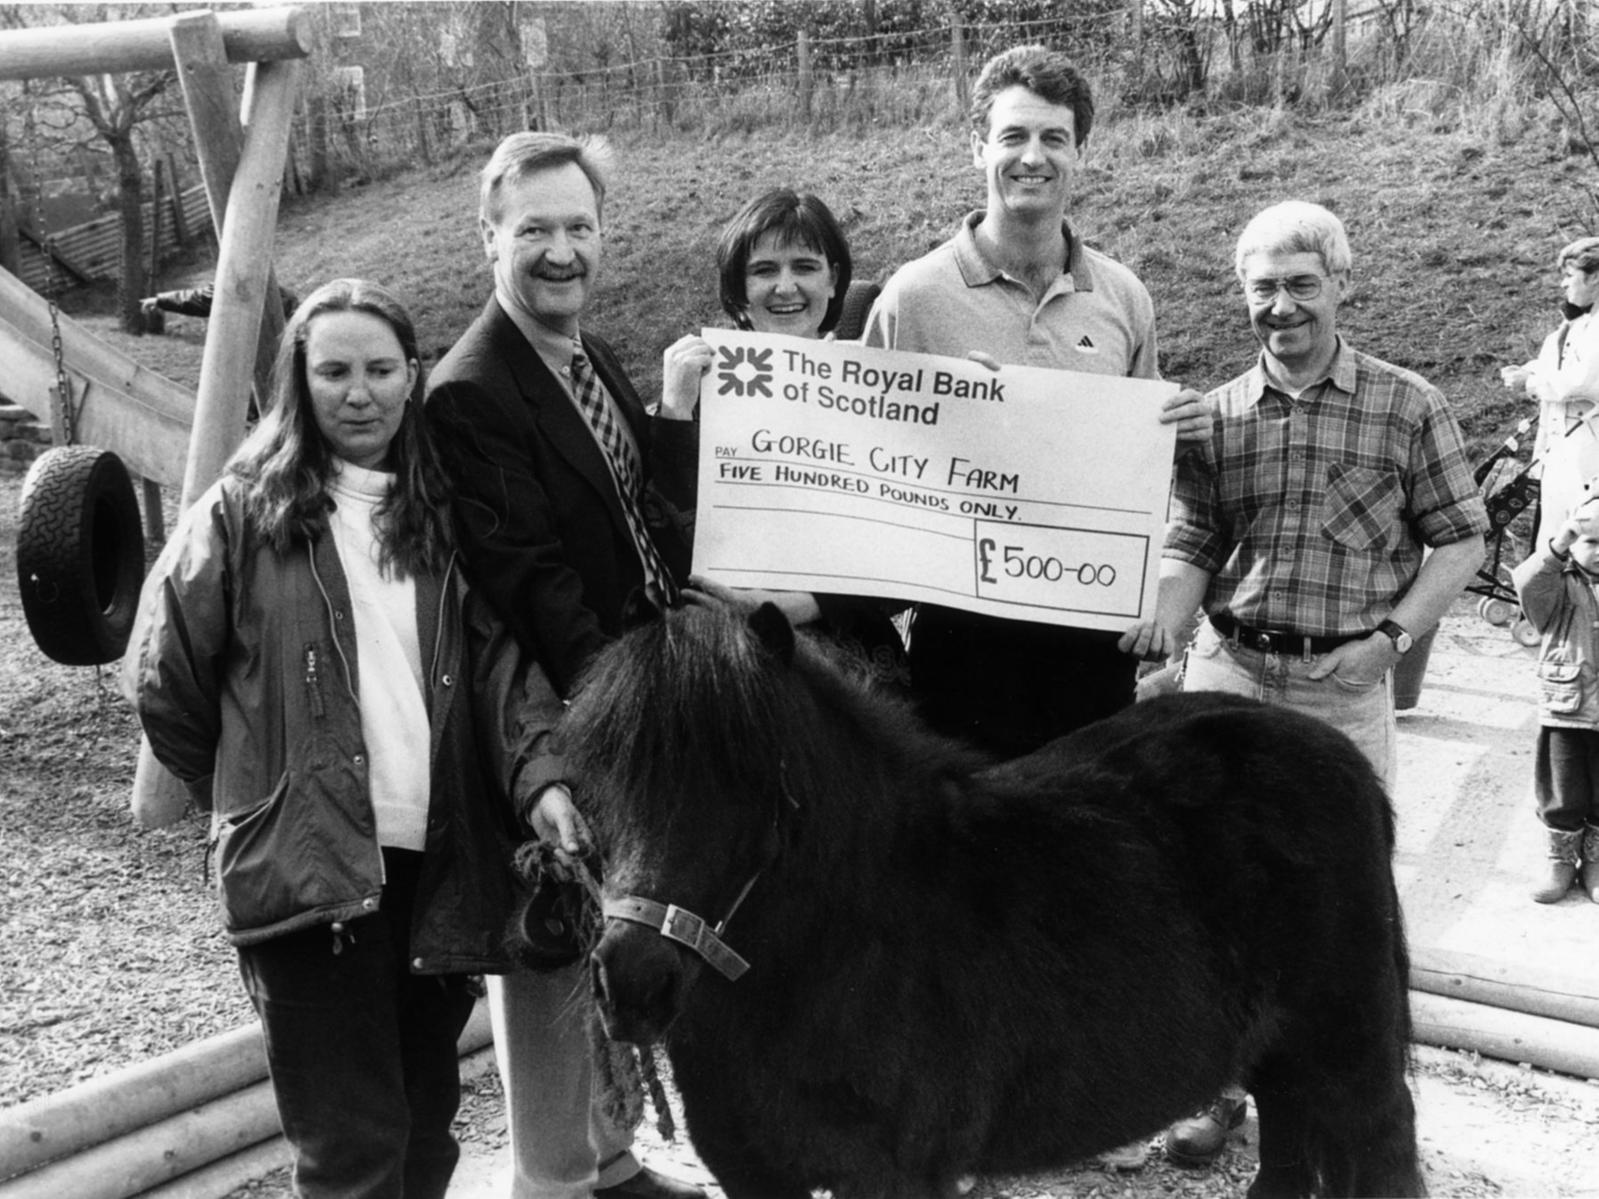 A cheque for 500 is presented at Gorgie City Farm.